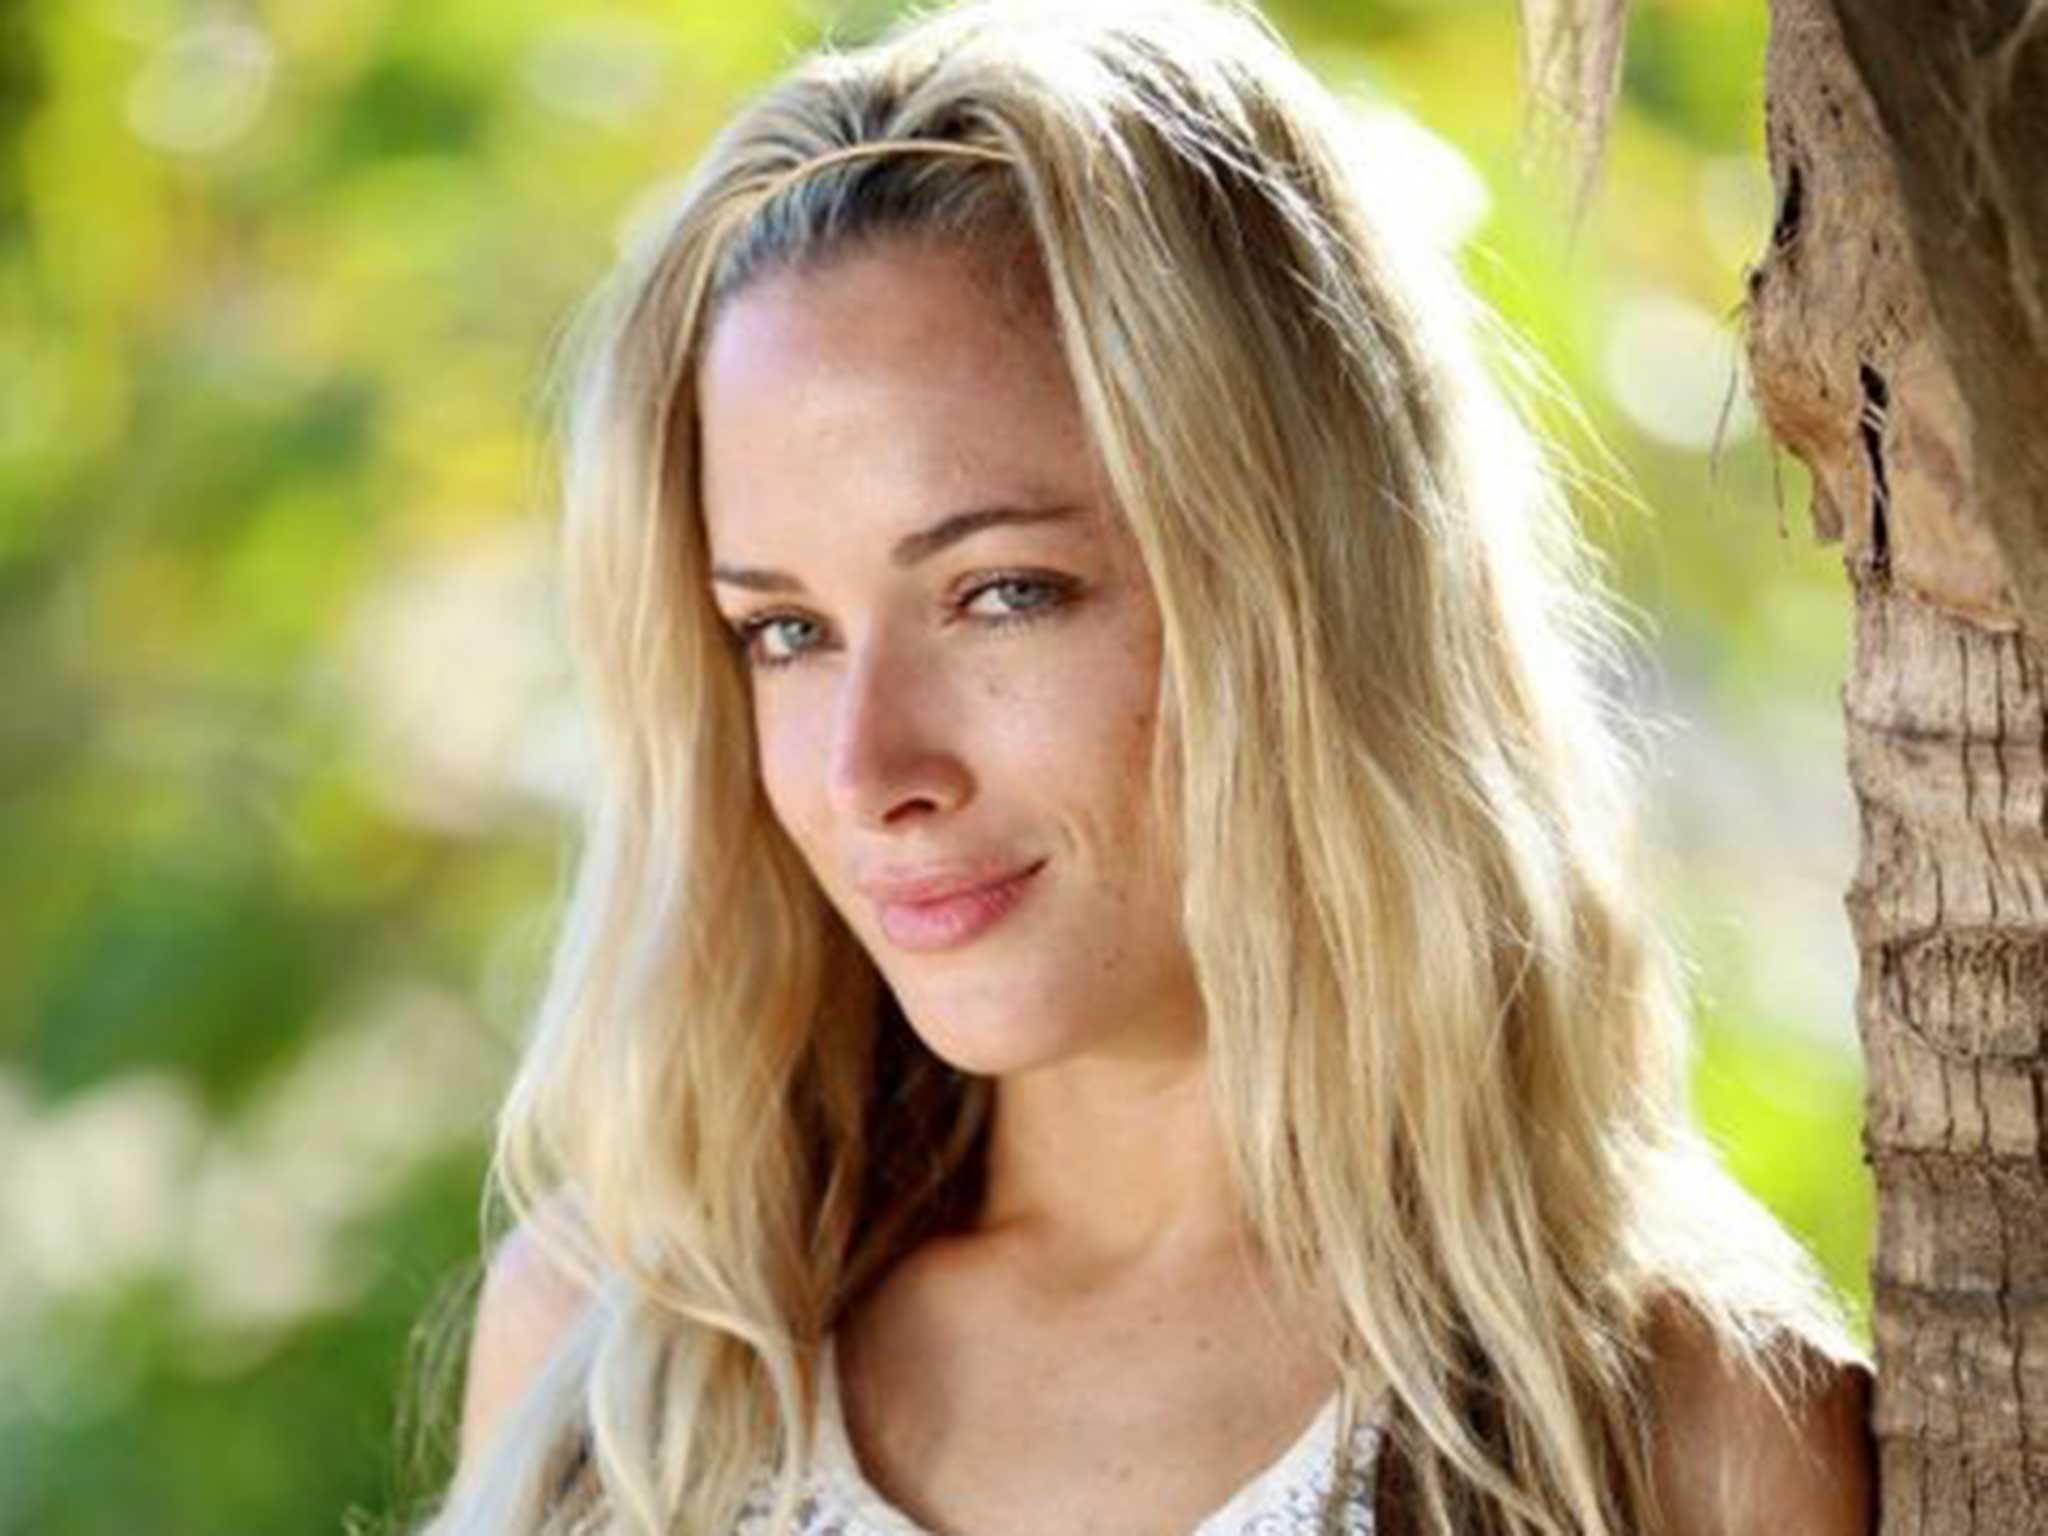 Model Reeva Steenkamp, whose messages saying that she was afraid of Pistorius were ignored by the judge